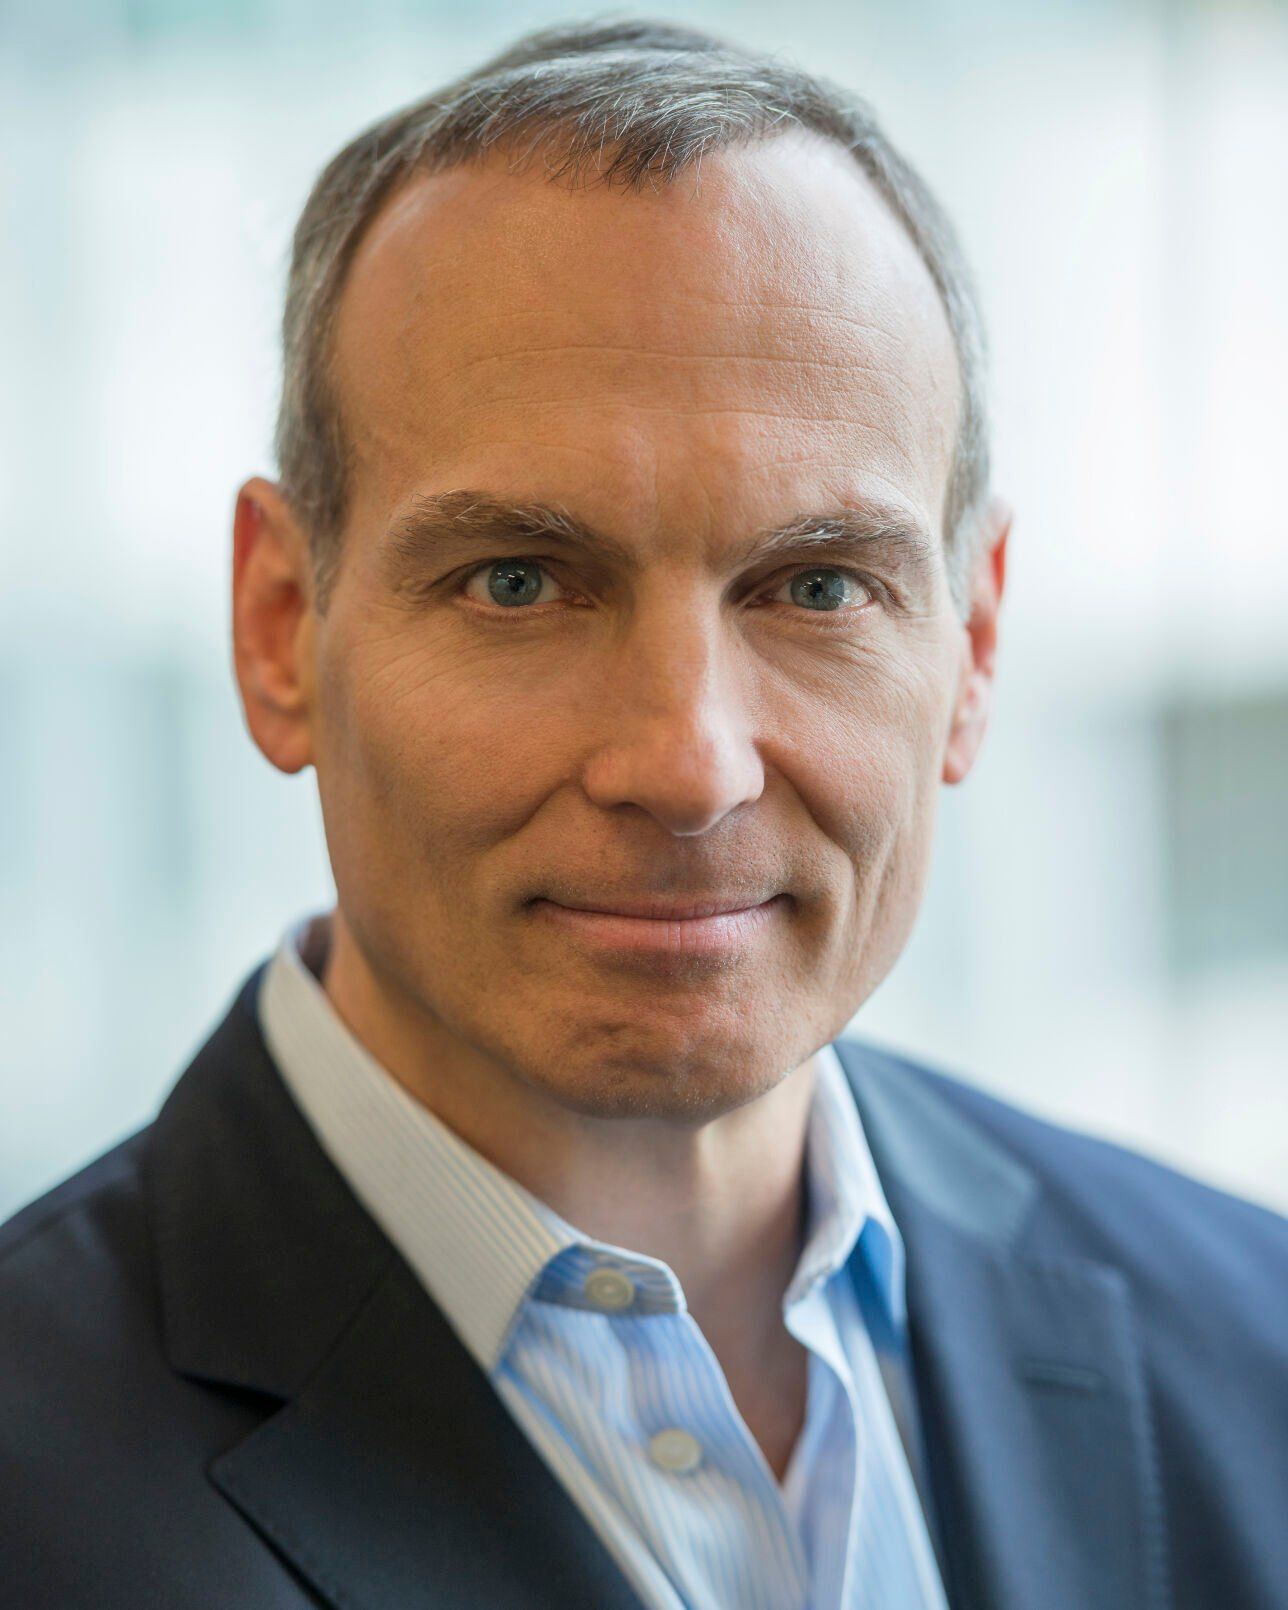 <p>This photo provided by Booking Holdings shows Glenn Fogel, CEO of Booking.com. The travel recovery has boosted Booking Holdings Inc. to record quarterly earnings, and Wall Street expects the company to post even bigger profits this year. (Booking Holdings via AP)</p>   PHOTO CREDIT: Booking Holdings